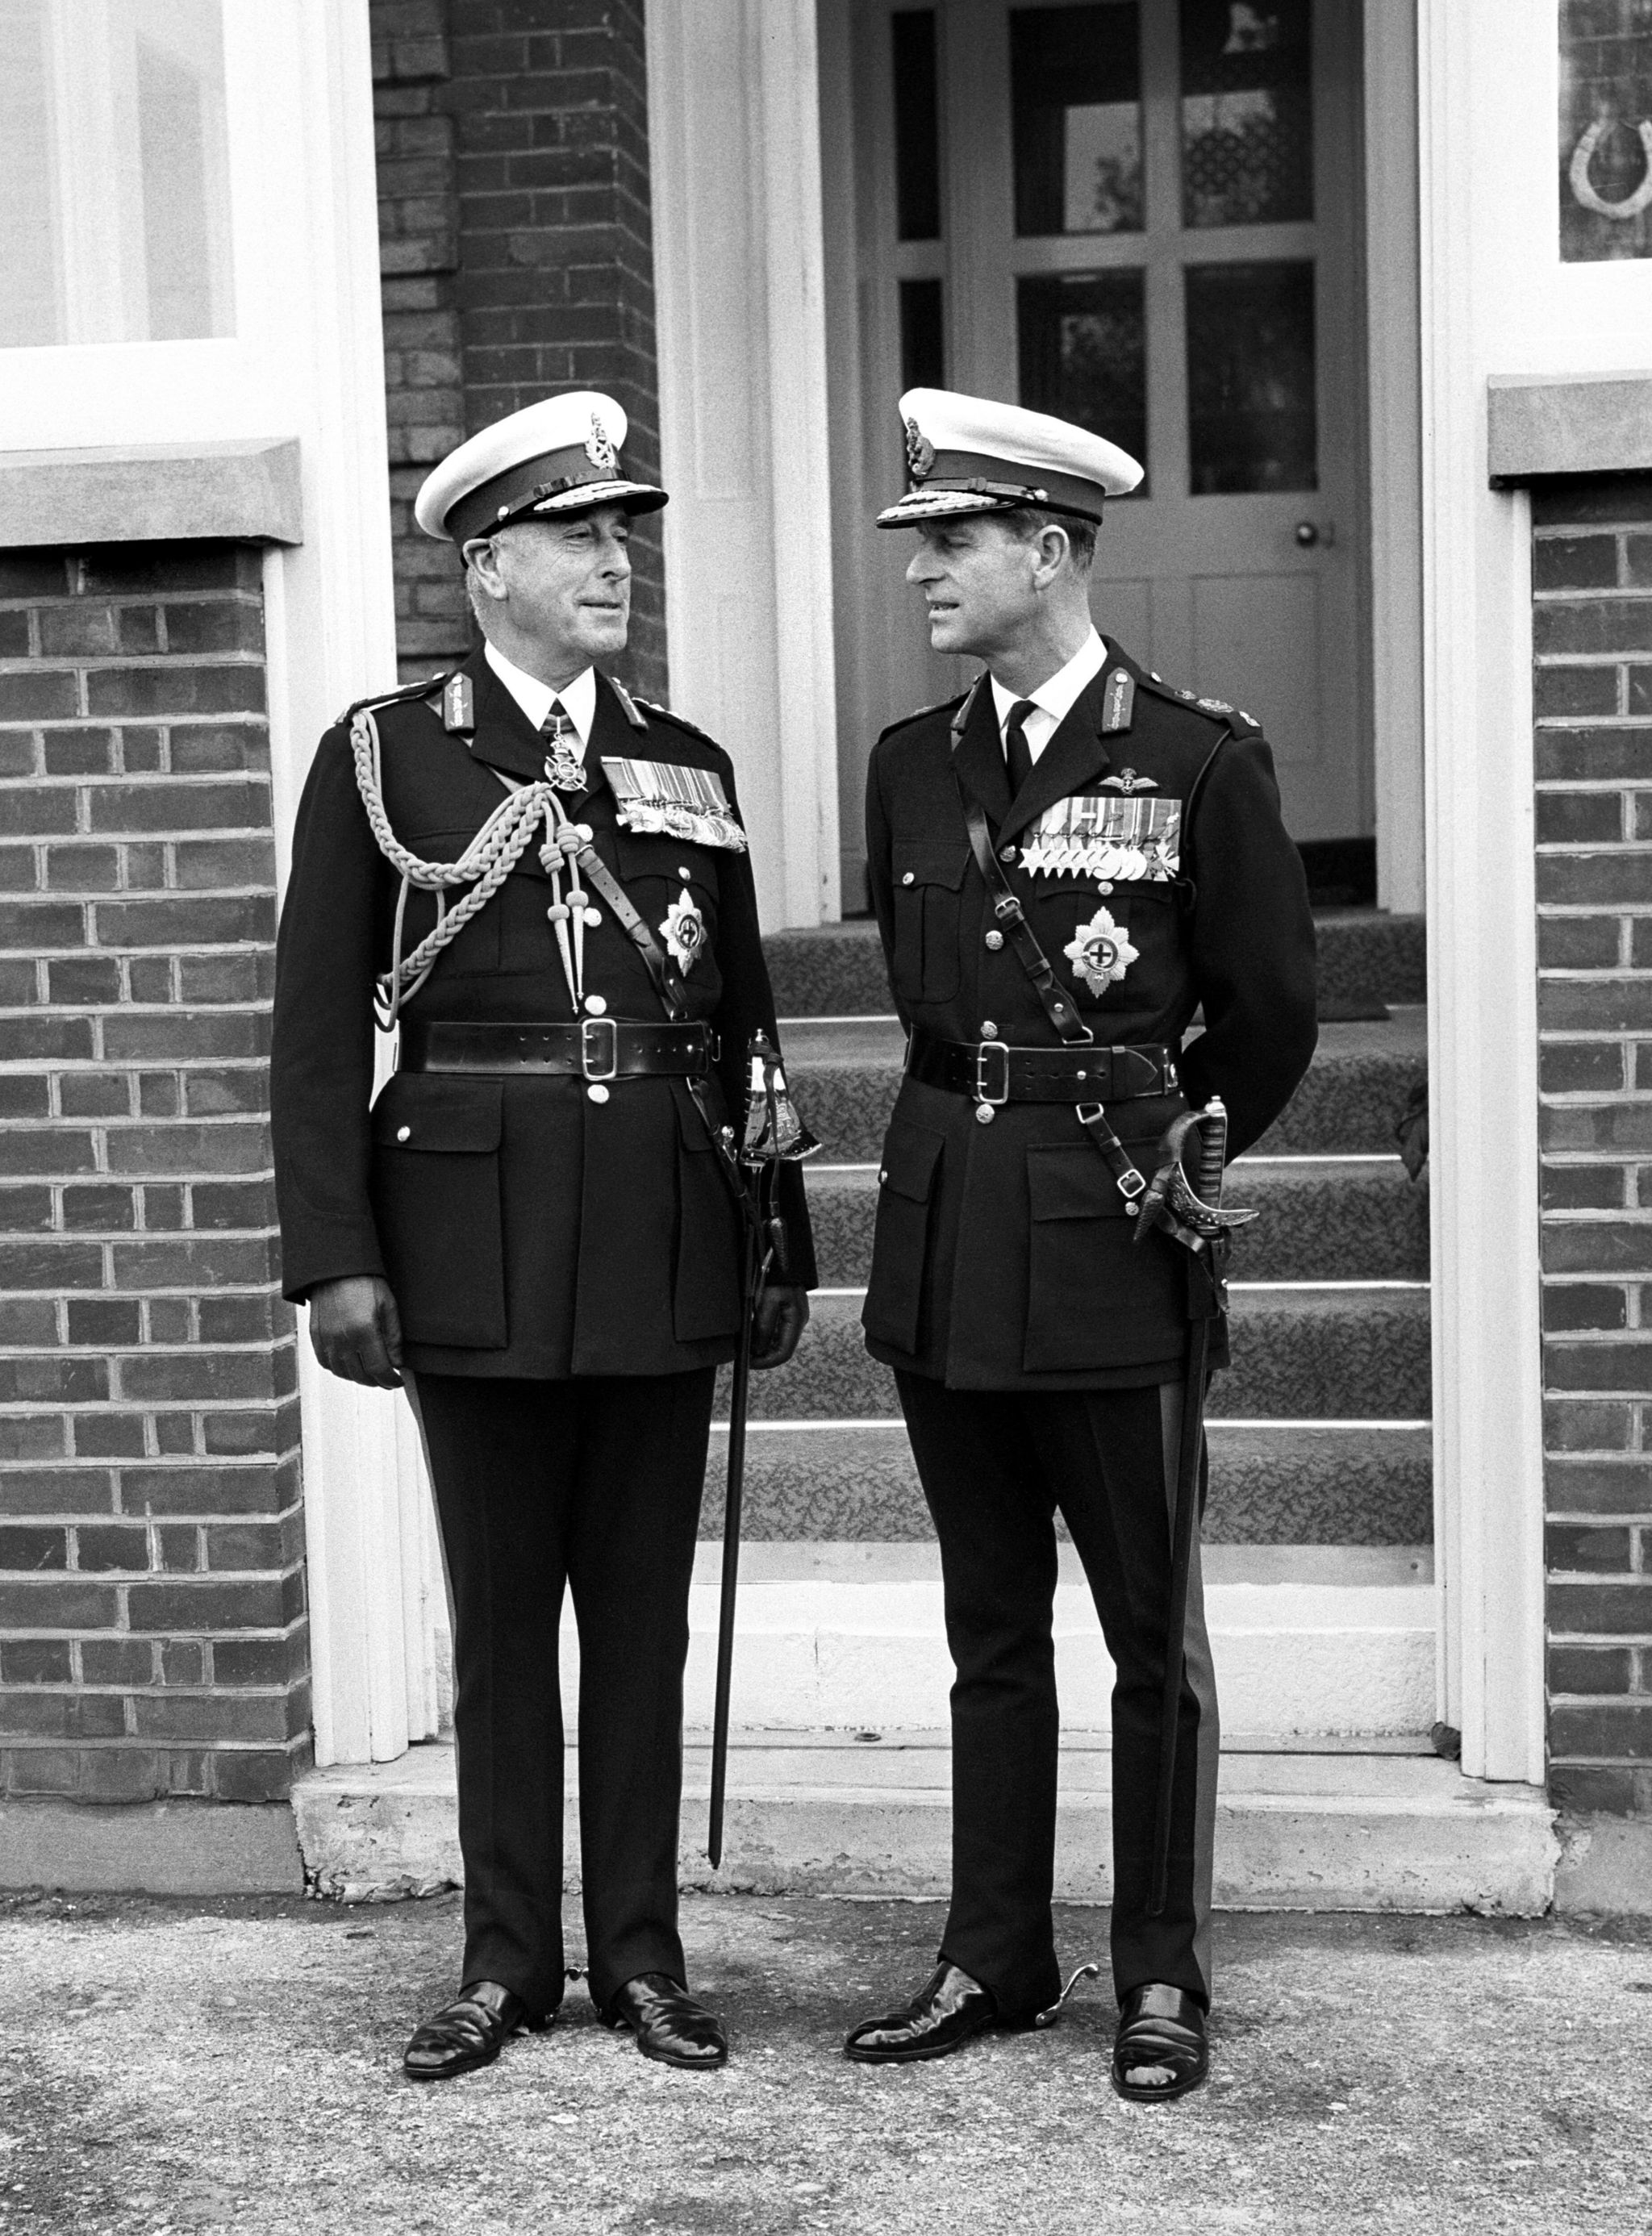 Prince Philip with his uncle, Admiral of the Fleet, Earl Mountbatten of Burma at the Royal Marines Barracks in Eastney near Portsmouth in 1965